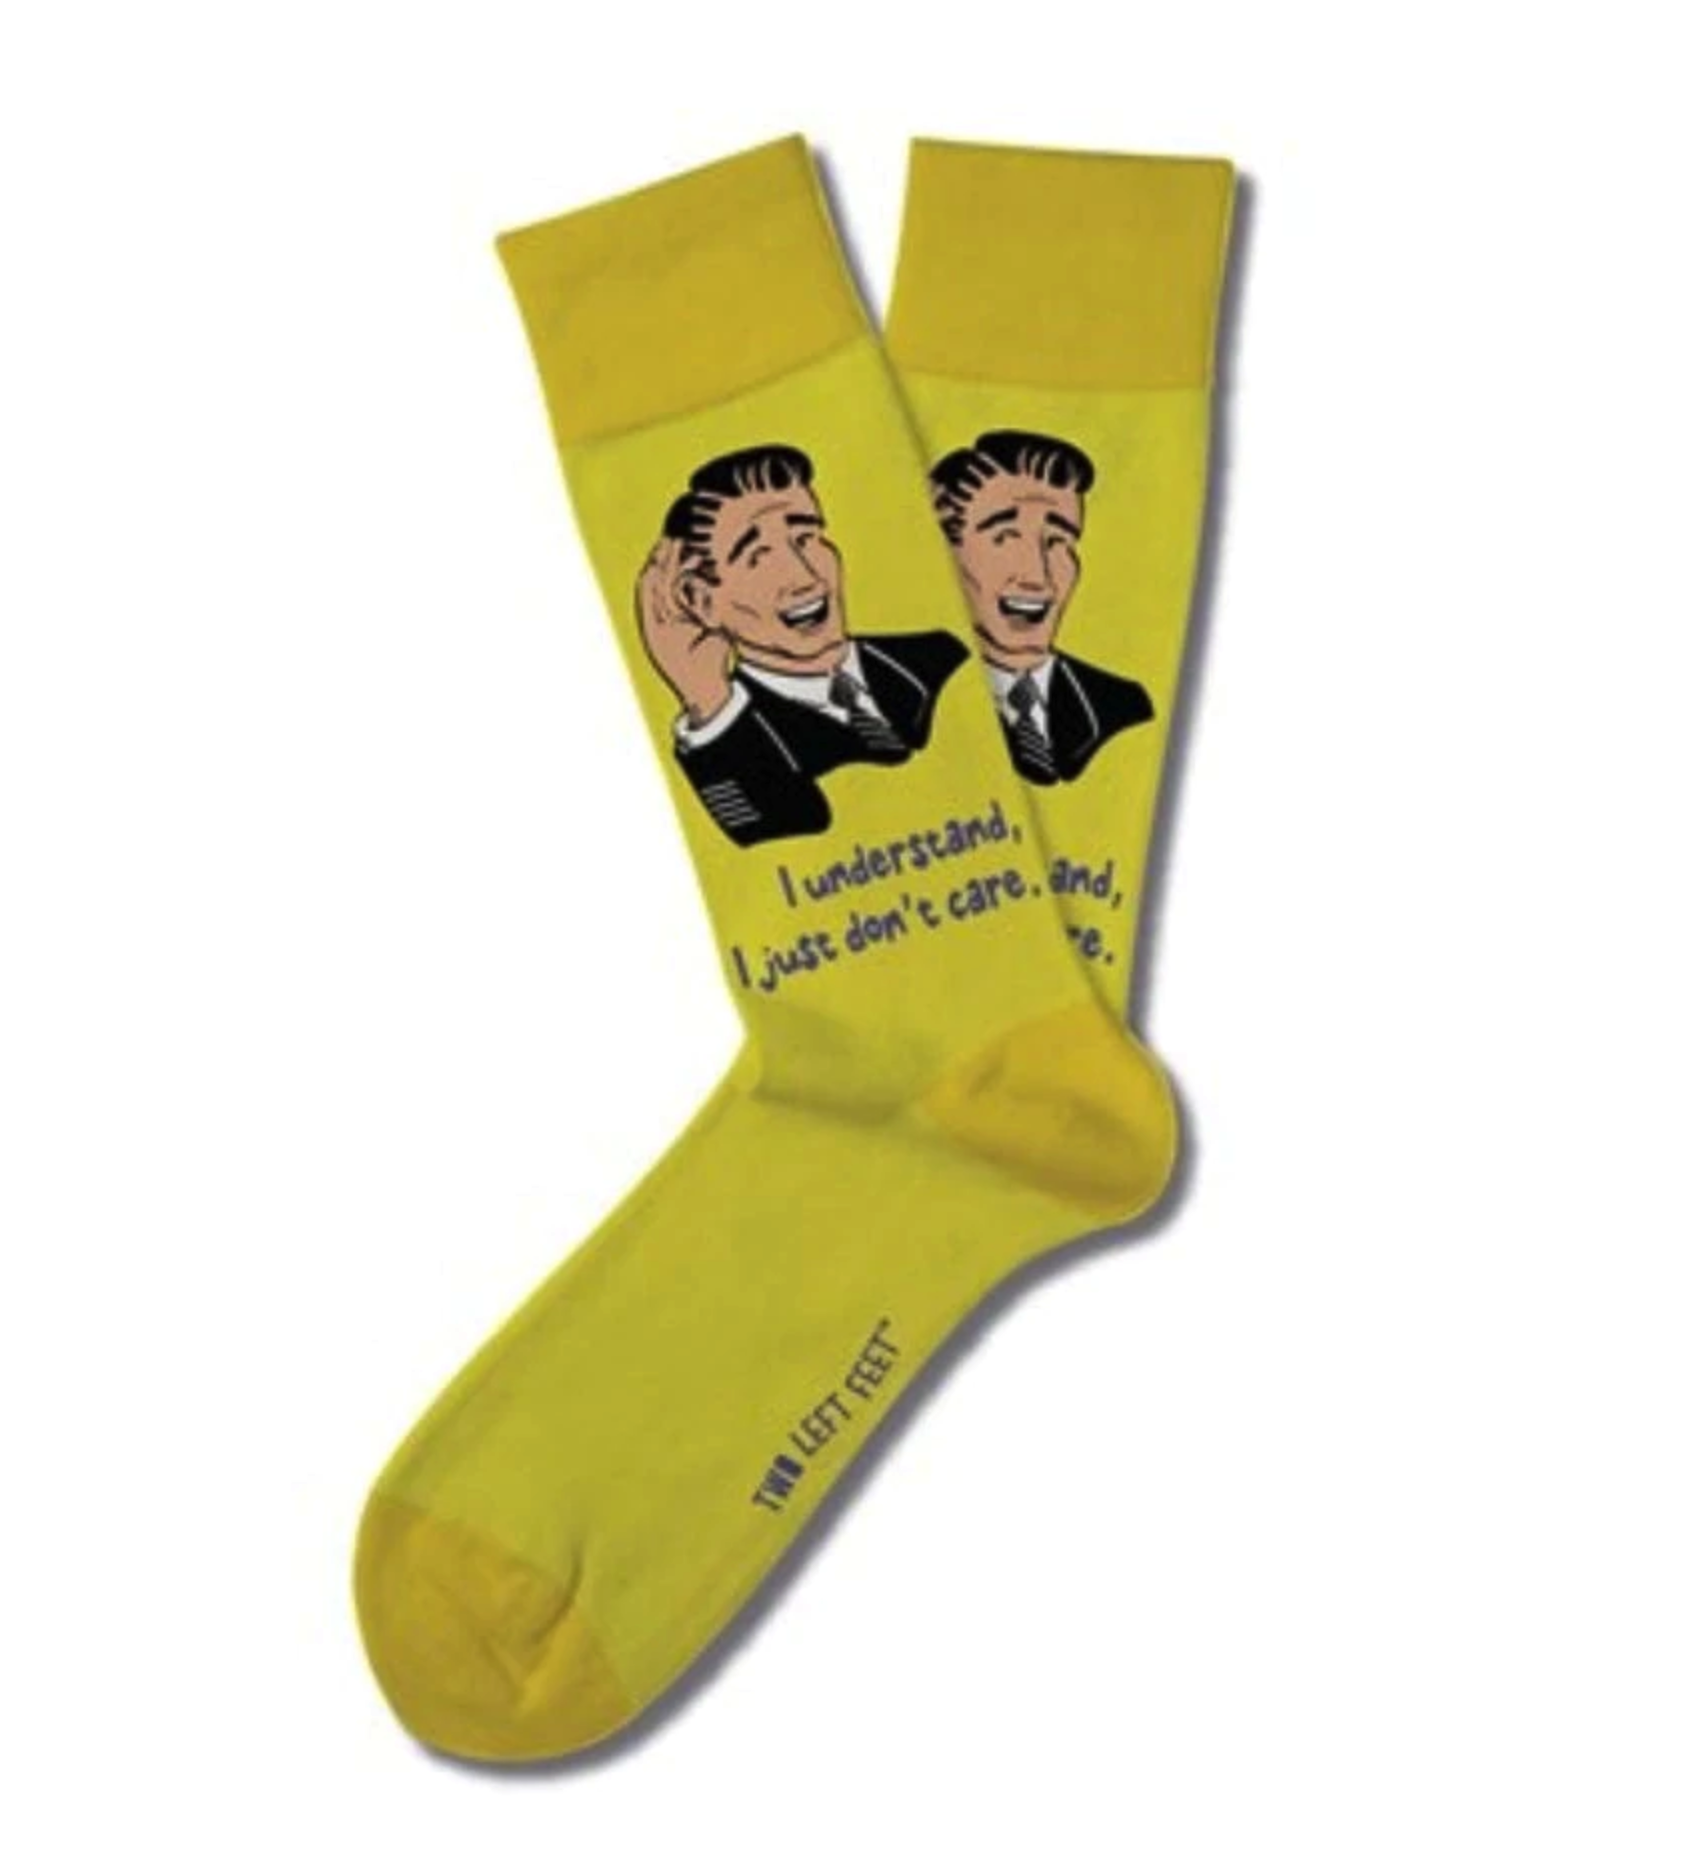 Two Left Feet "I Understand, I Just Don't Care" (Retro Remix) Socks